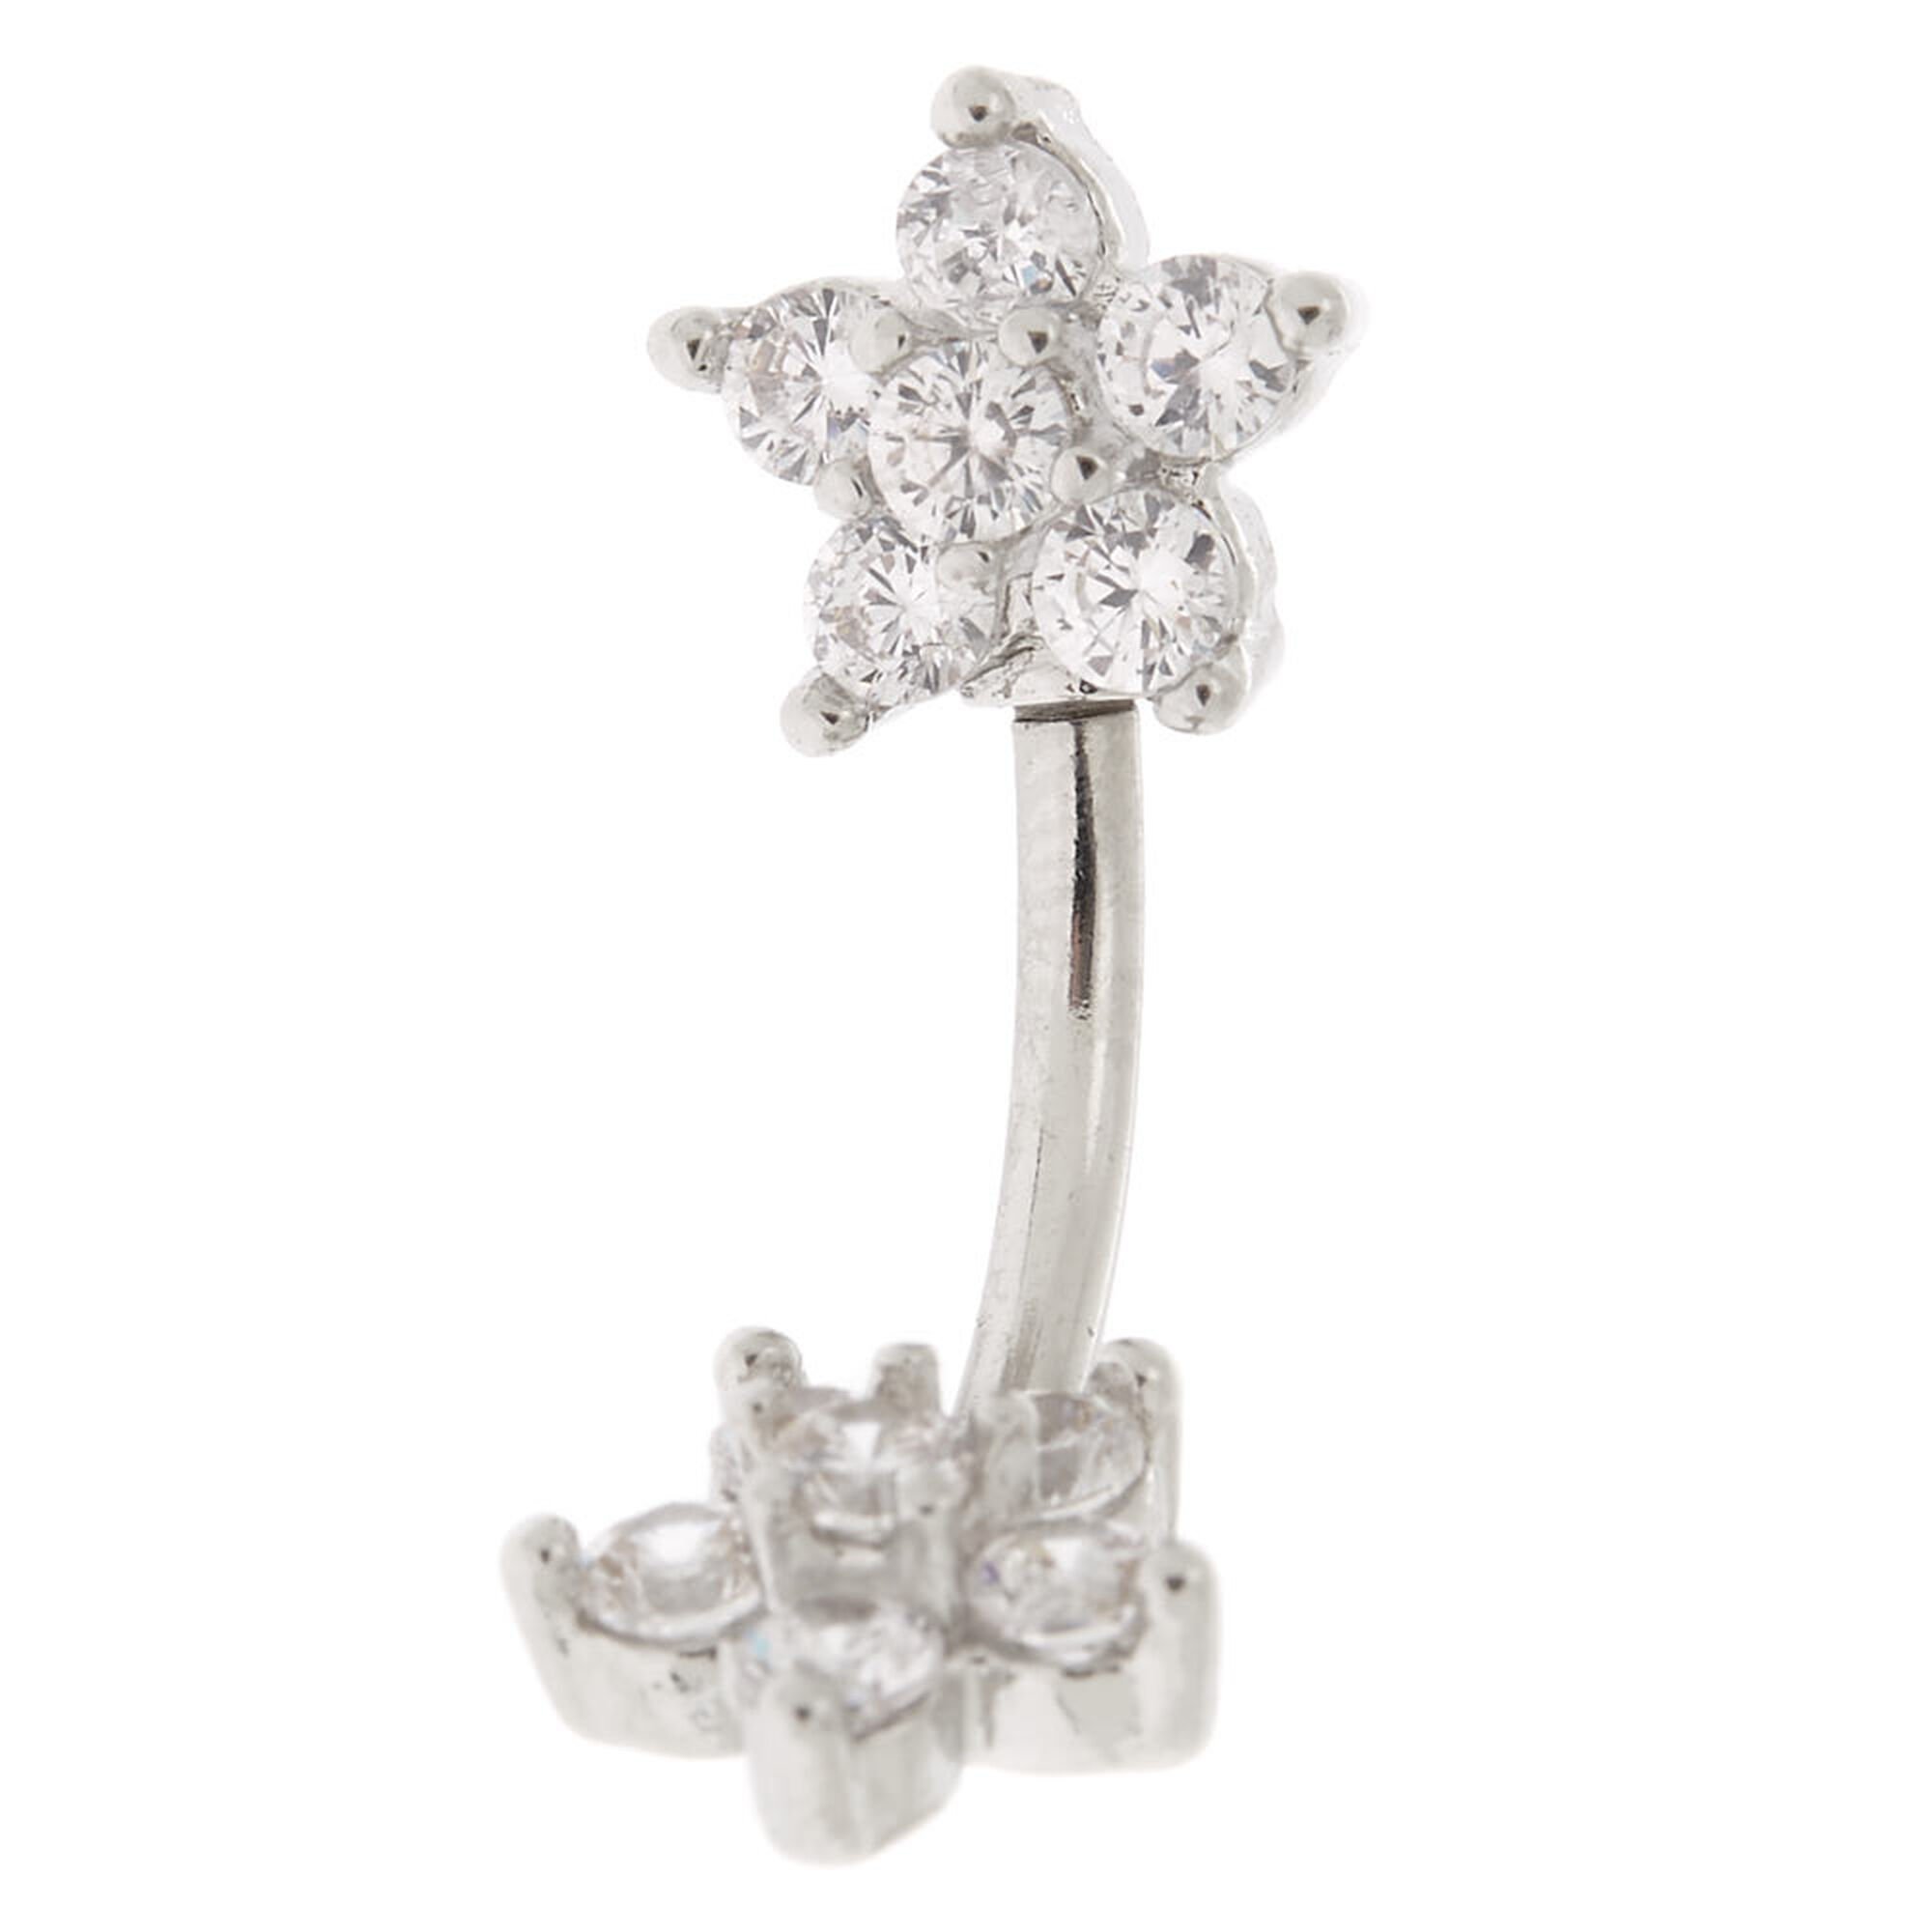 View Claires Tone 14G Double Flower Crystal Belly Ring Silver information